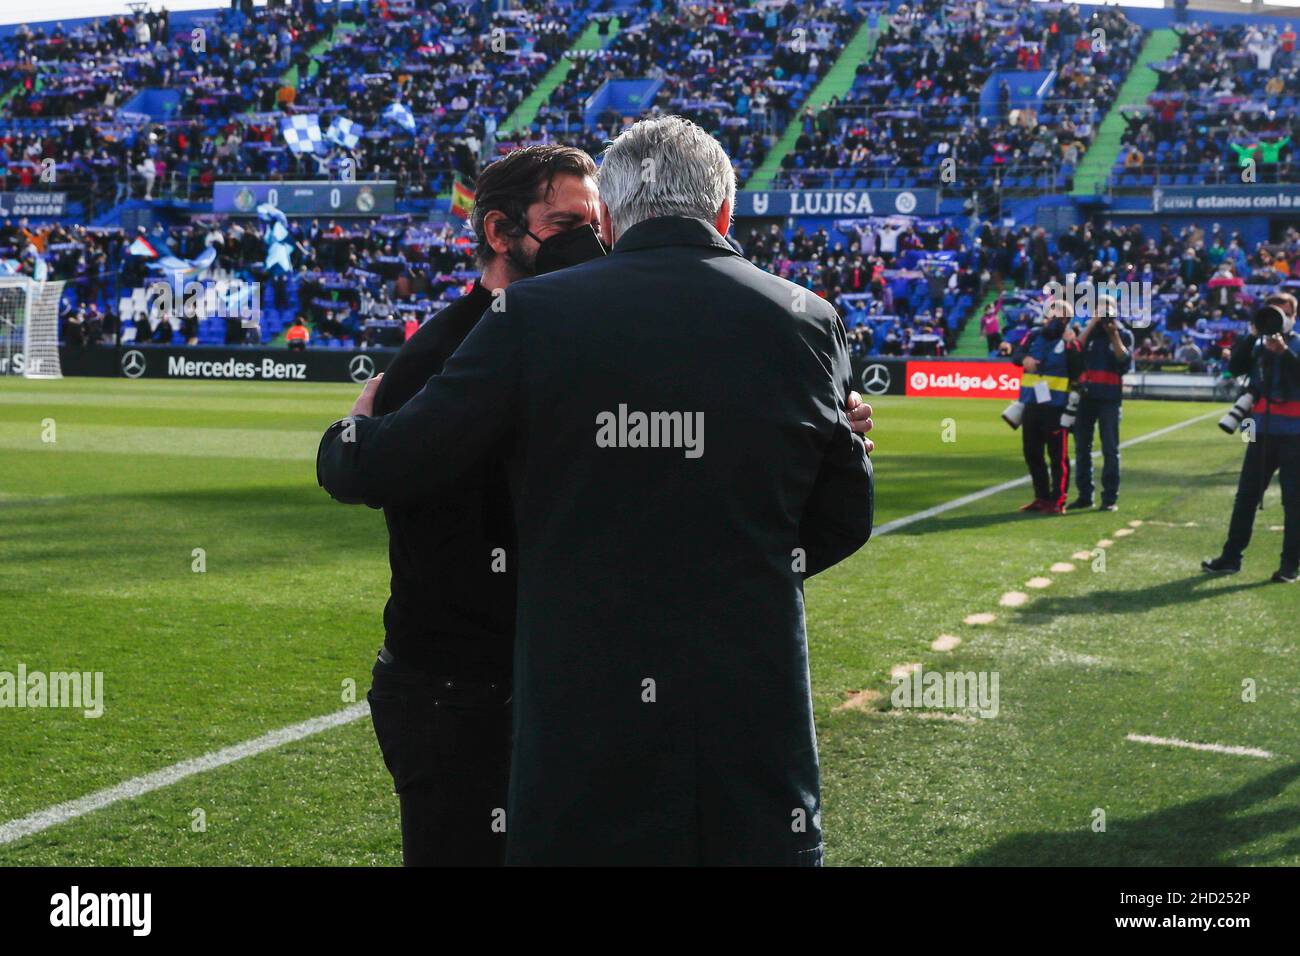 Madrid, Spain. 02nd Jan, 2022. Quique Sanchez Flores of Getafe CF with Carlo Ancelotti of Real Madrid during the La Liga match between Getafe CF and Real Madrid at Coliseum Alfonso Perez Stadium in Madrid, Spain. Credit: DAX Images/Alamy Live News Stock Photo